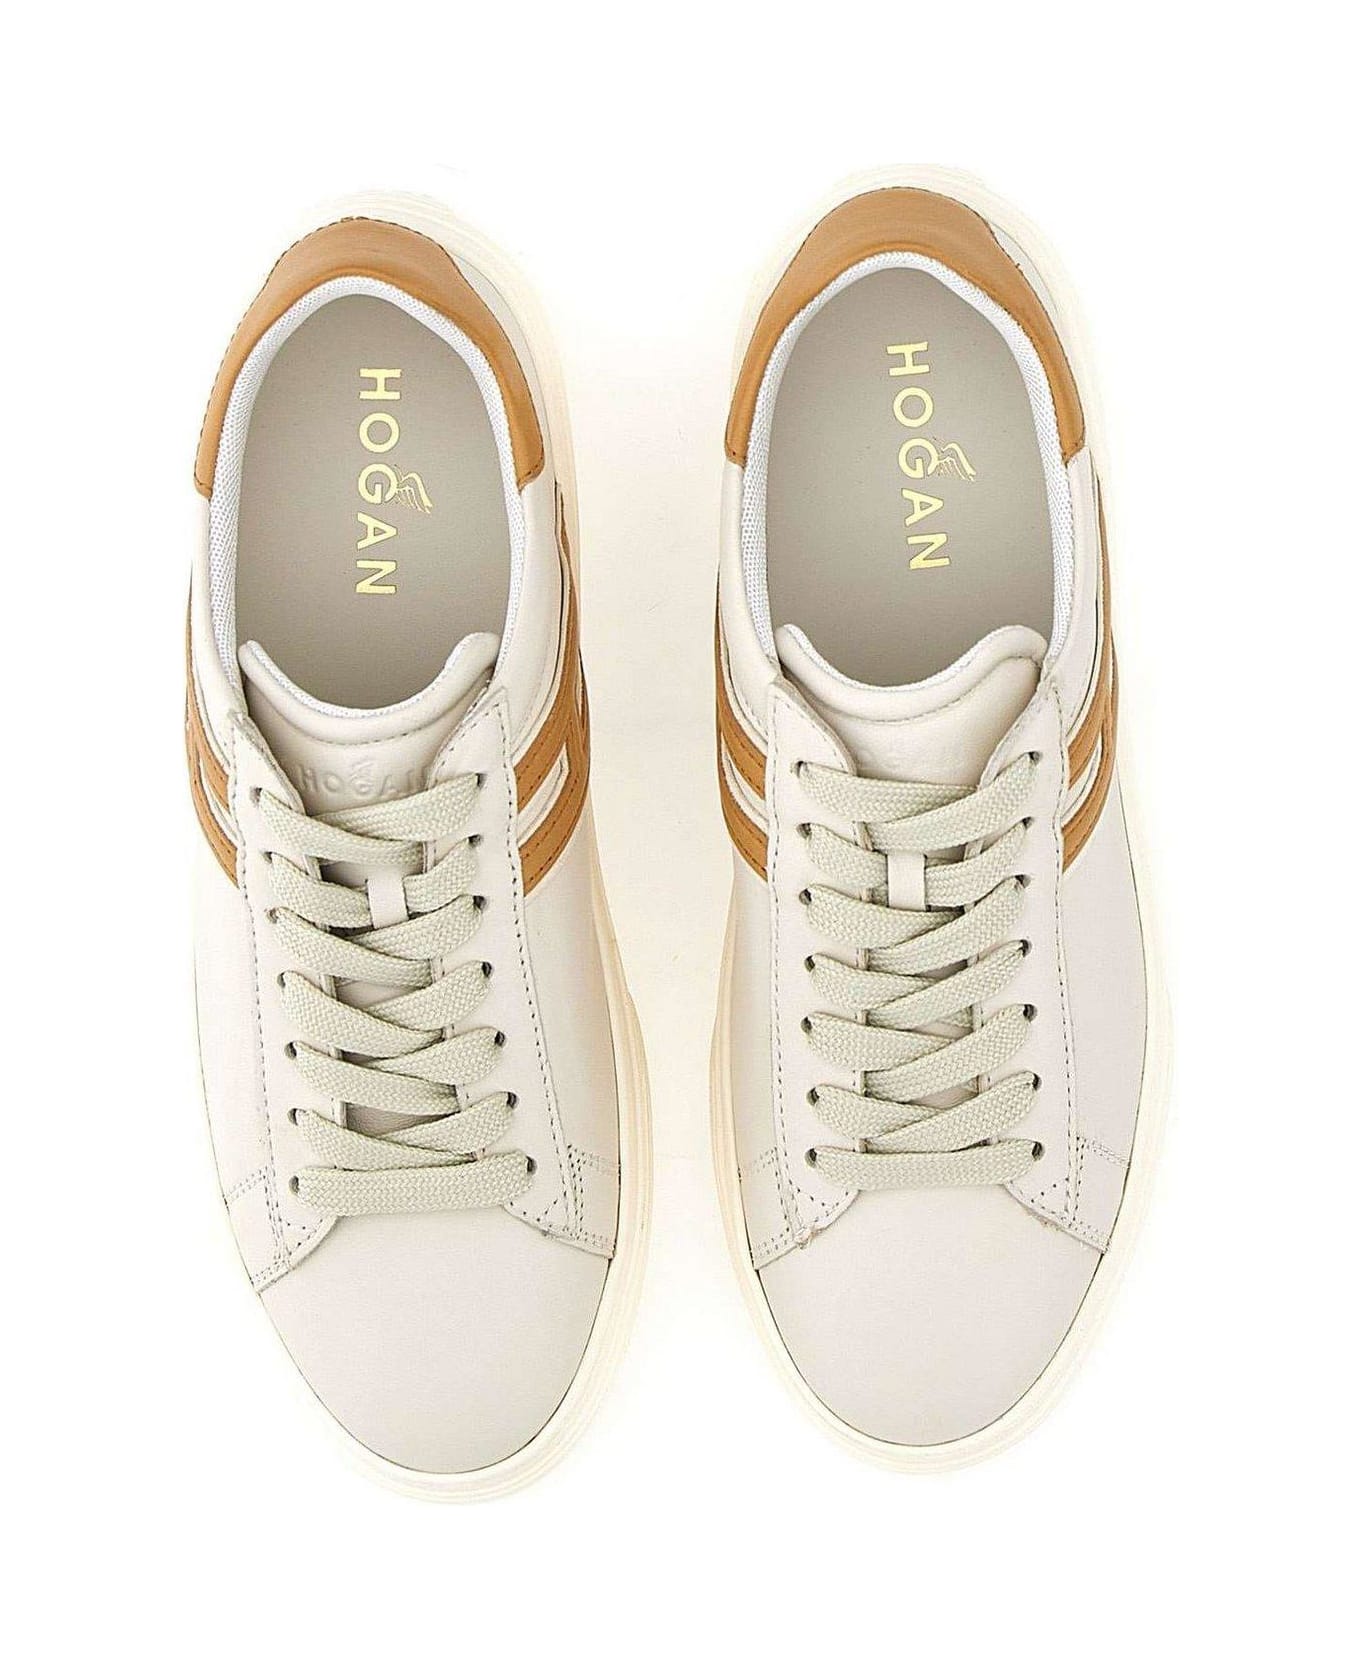 Hogan H365 Lace-up Sneakers - White スニーカー